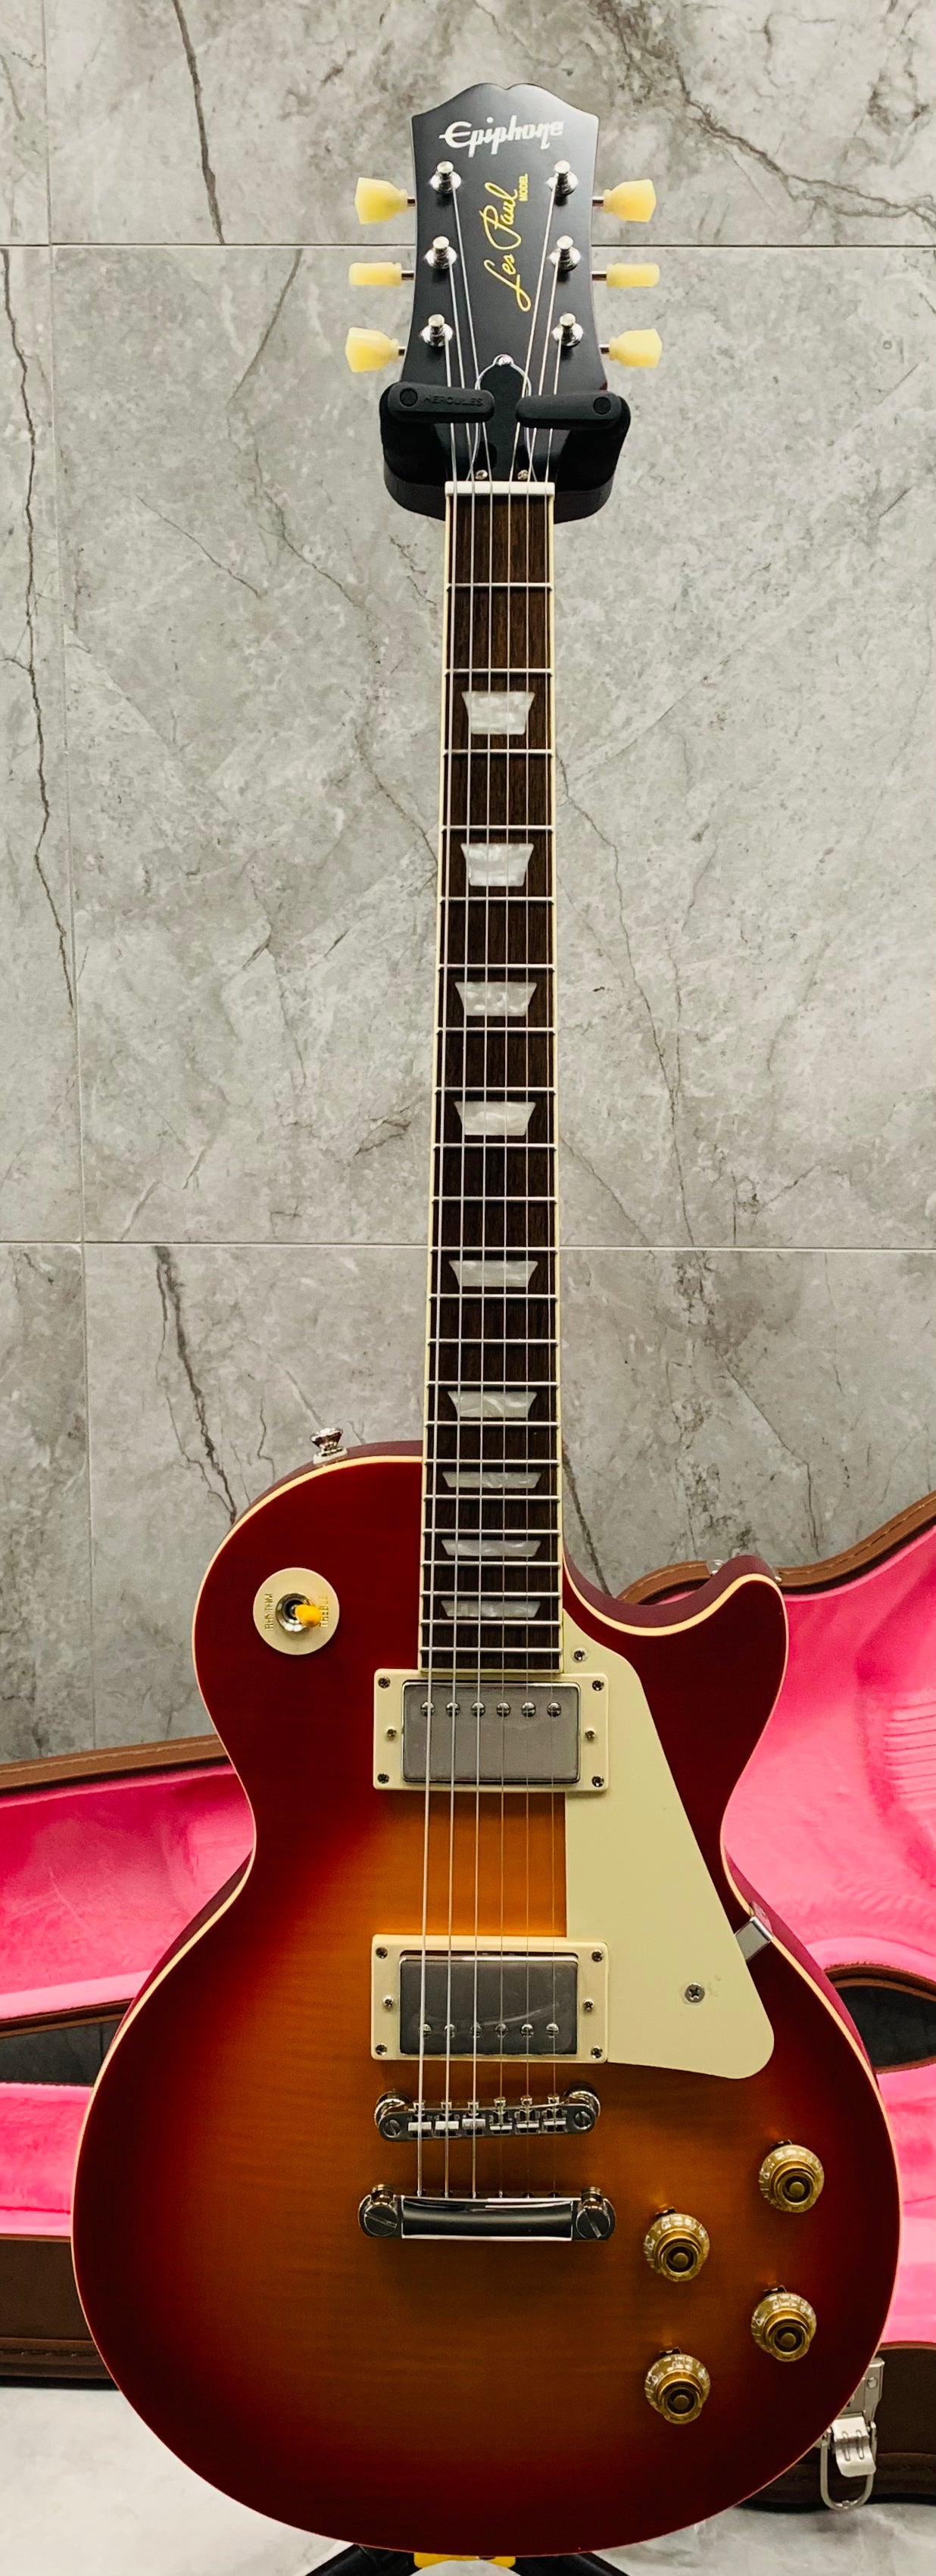 Epiphone Limited Edition 1959 Les Paul Standard 59 EL59ADCNH – Aged Dark Cherry Burst SERIAL NUMBER 21081521644 - 8.8 LBS